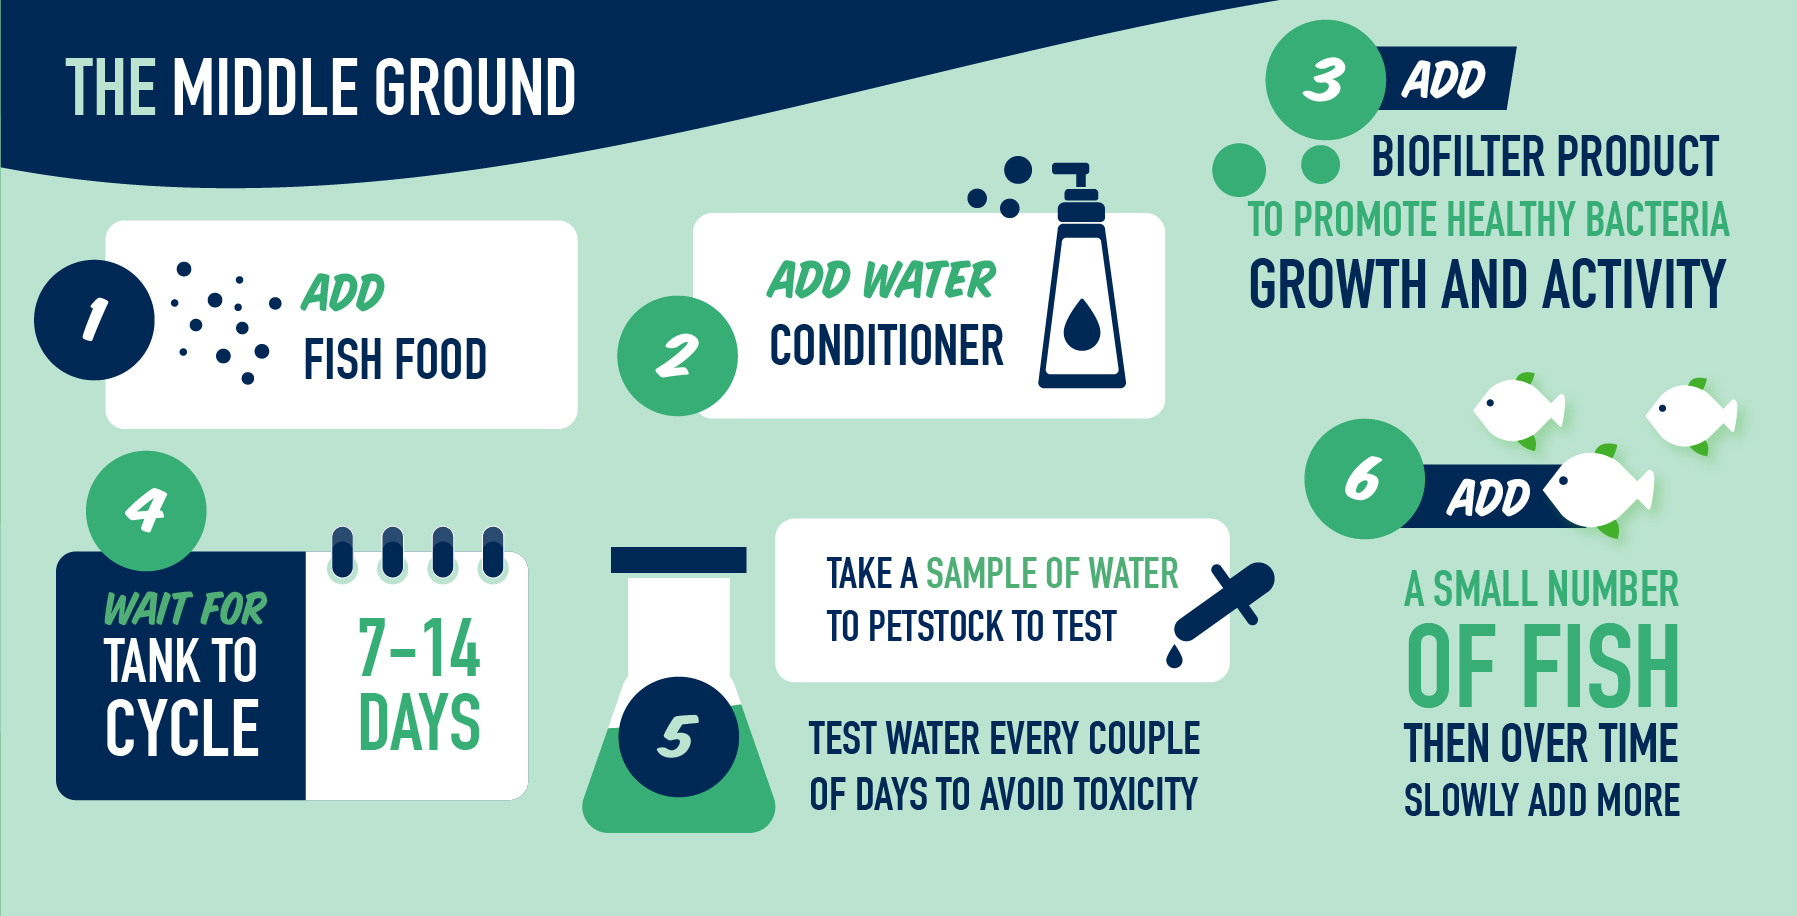 The Middle Ground: 1. Add fish food. 2. Add water conditioner. 3. Add biofilter product to promote healthy bacteria growth and activity. 4. Wait 7 to 14 days for tank to cycle. 5. Take a sample of water to PETstock to test. Test water every couple of days to avoid toxicity. 6. Add a small number of fish then over time slowly add more.